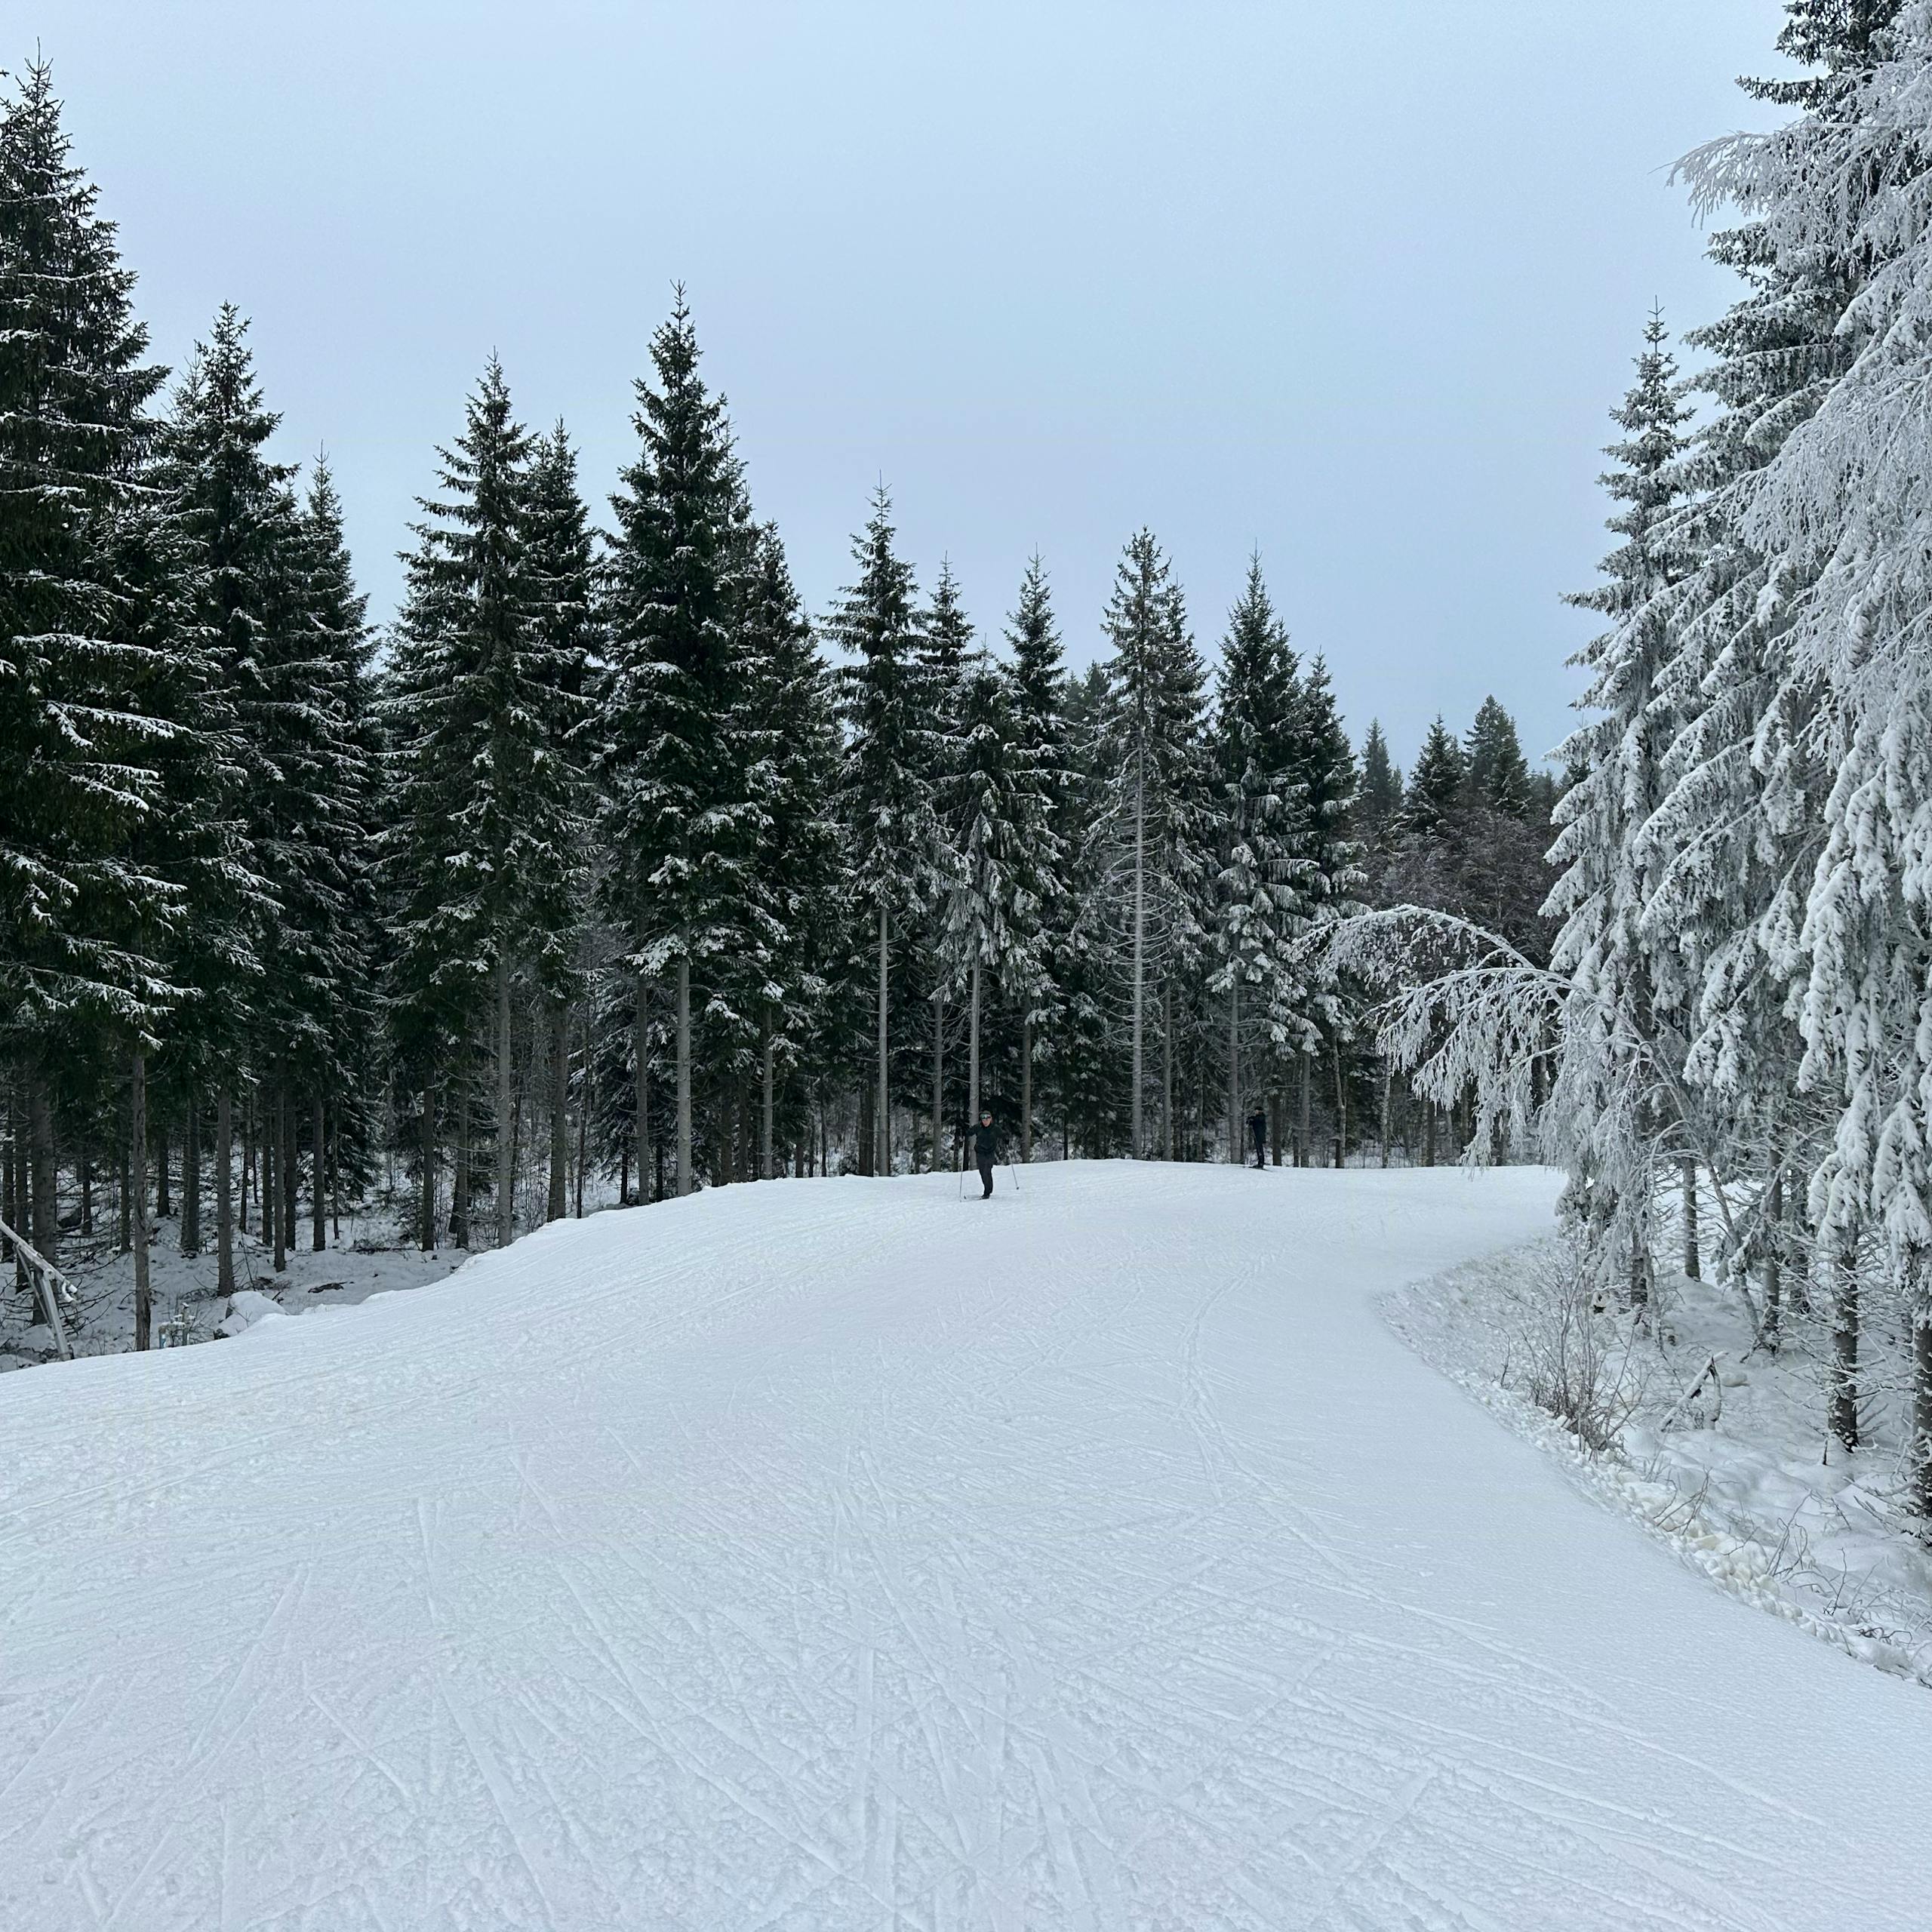 Join Amalie's cross-country skiing holiday in Sweden